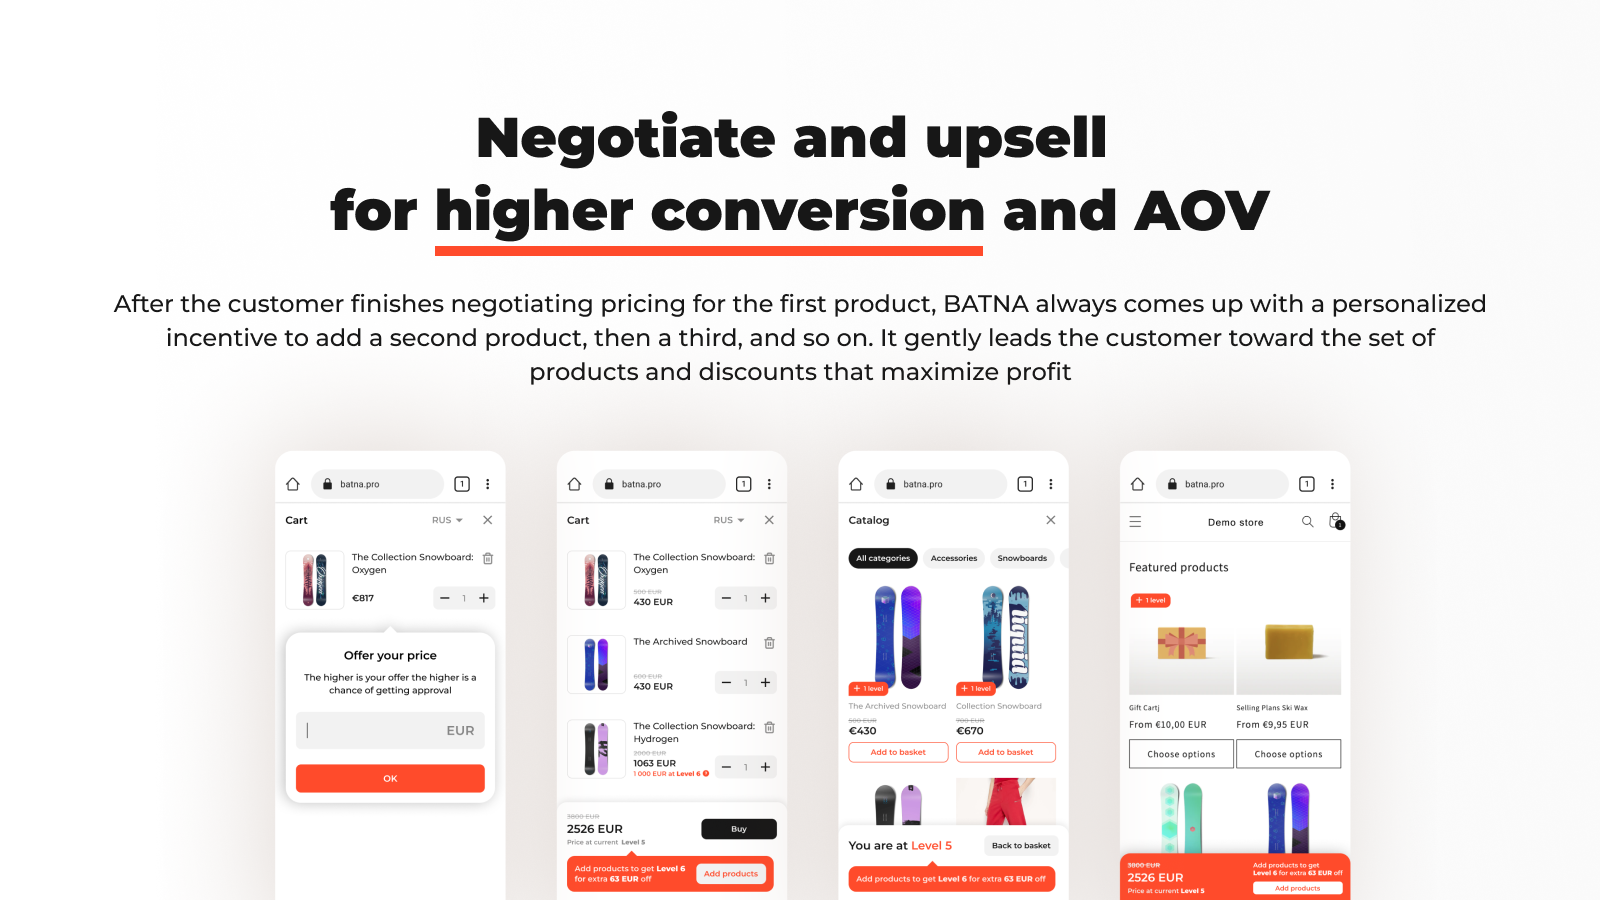 Negotiation boosts conversion and AOV due to smart incentives